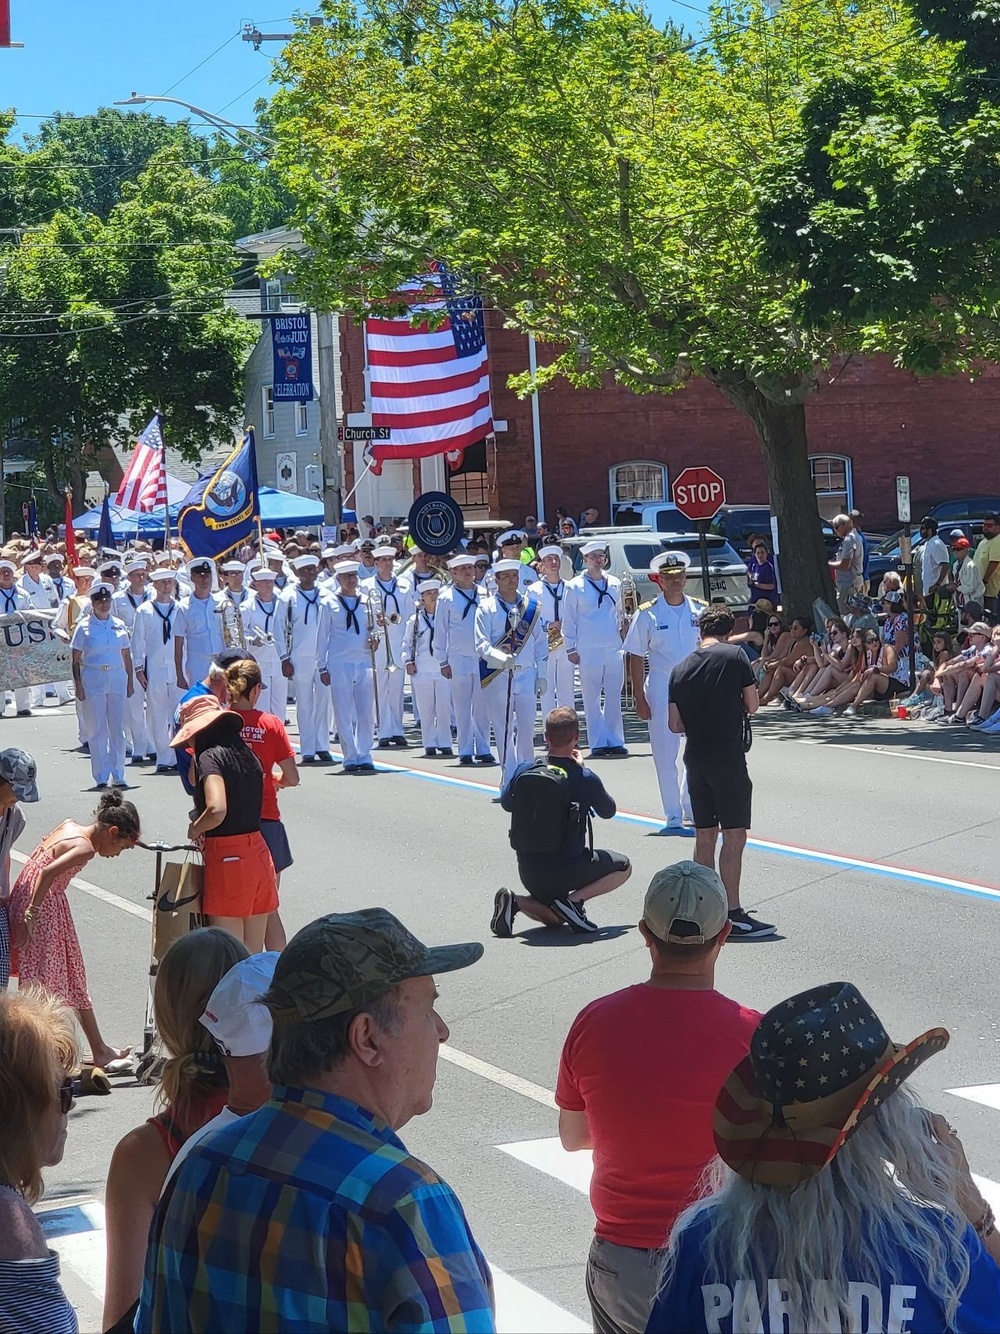 DVIDS Images 237th Annual 4th of July Parade Held In Bristol, RI